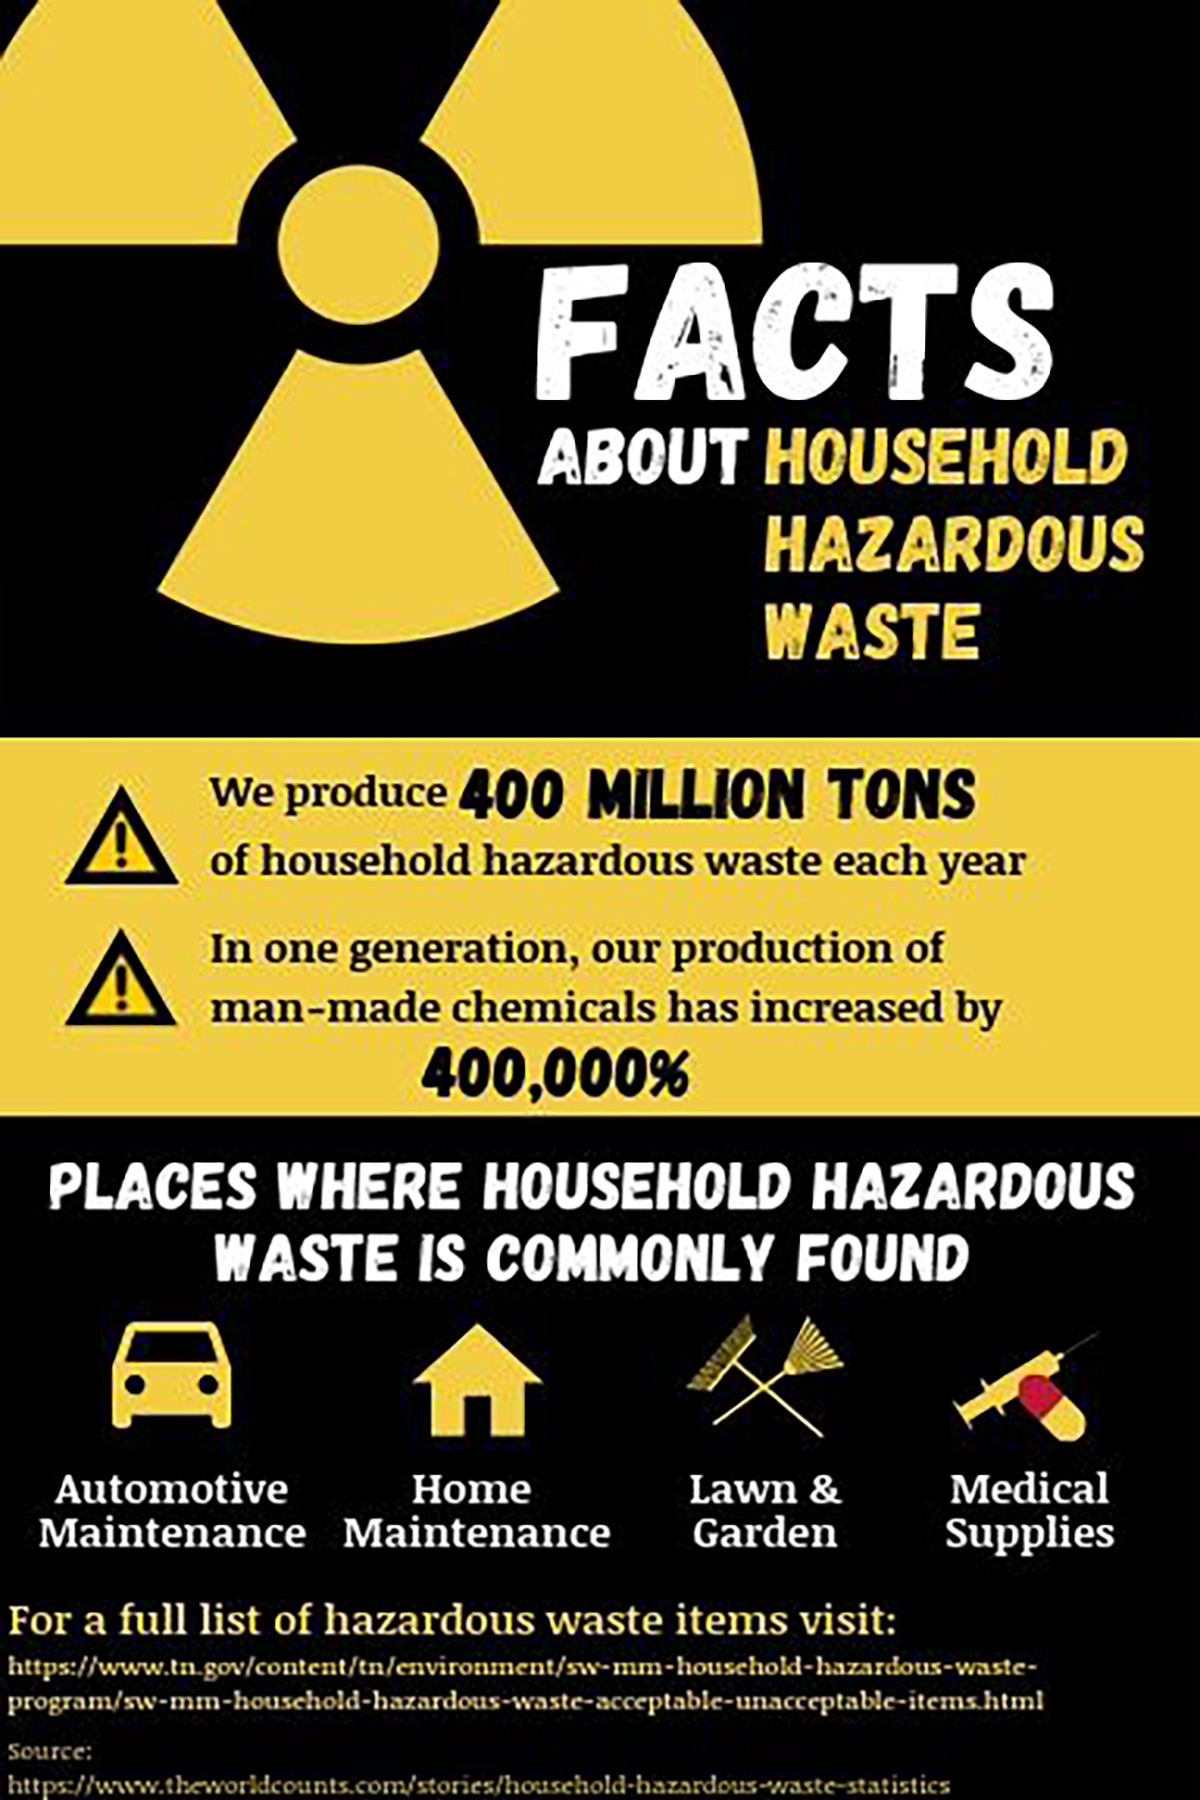 Toxic waste facts and information